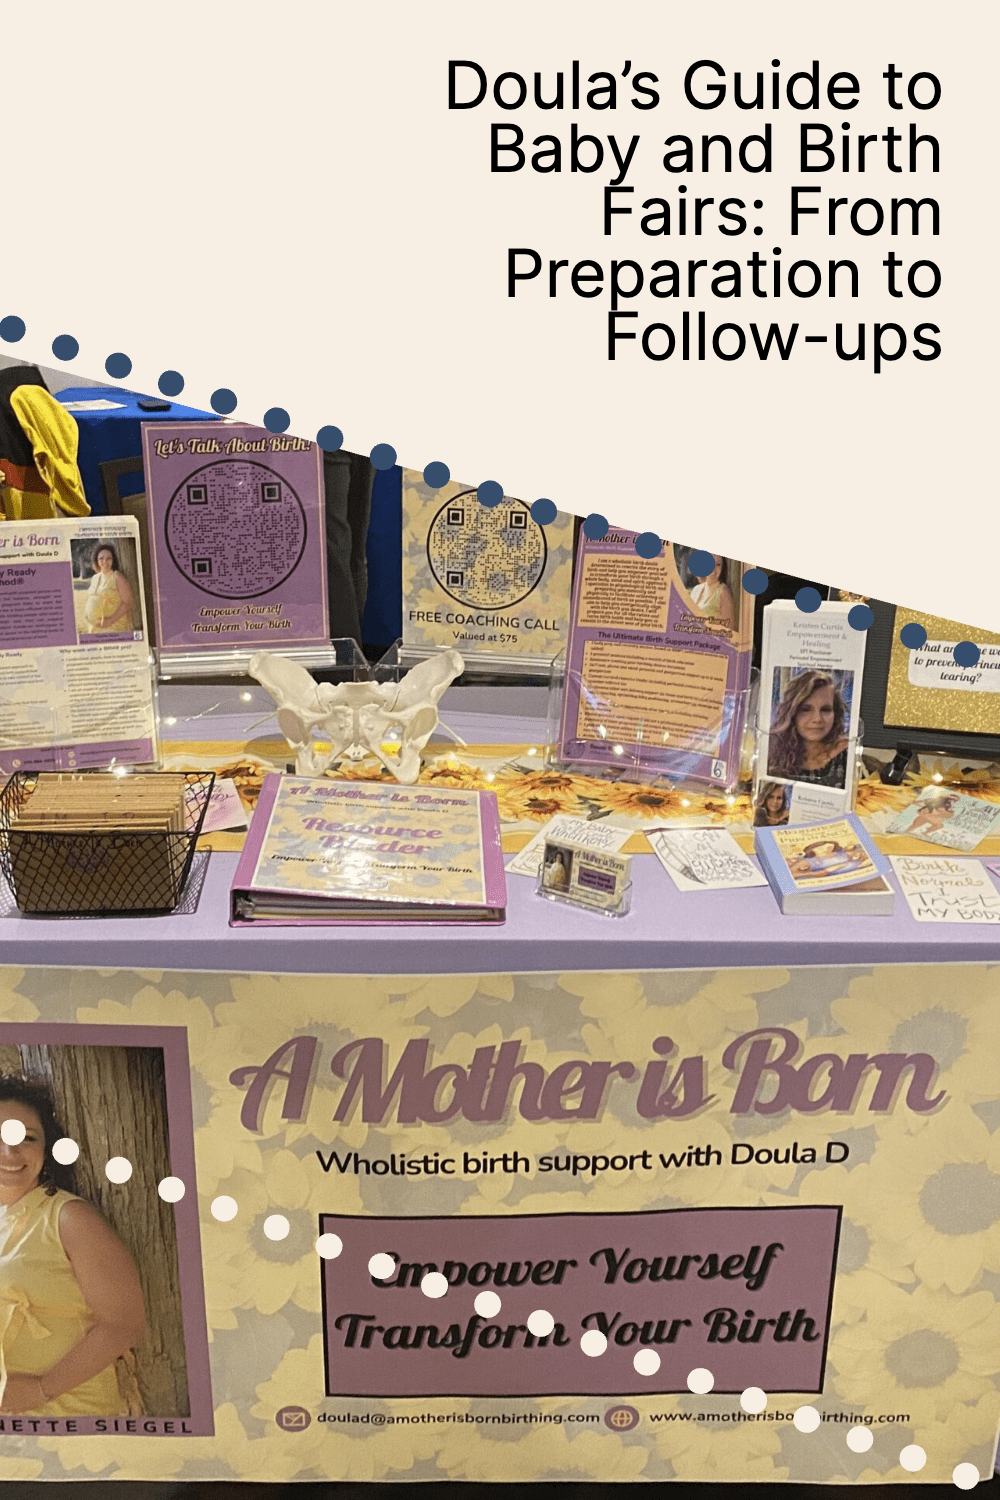 Doula's Guide to Baby and Birth Fairs: Preparation to Follow-ups